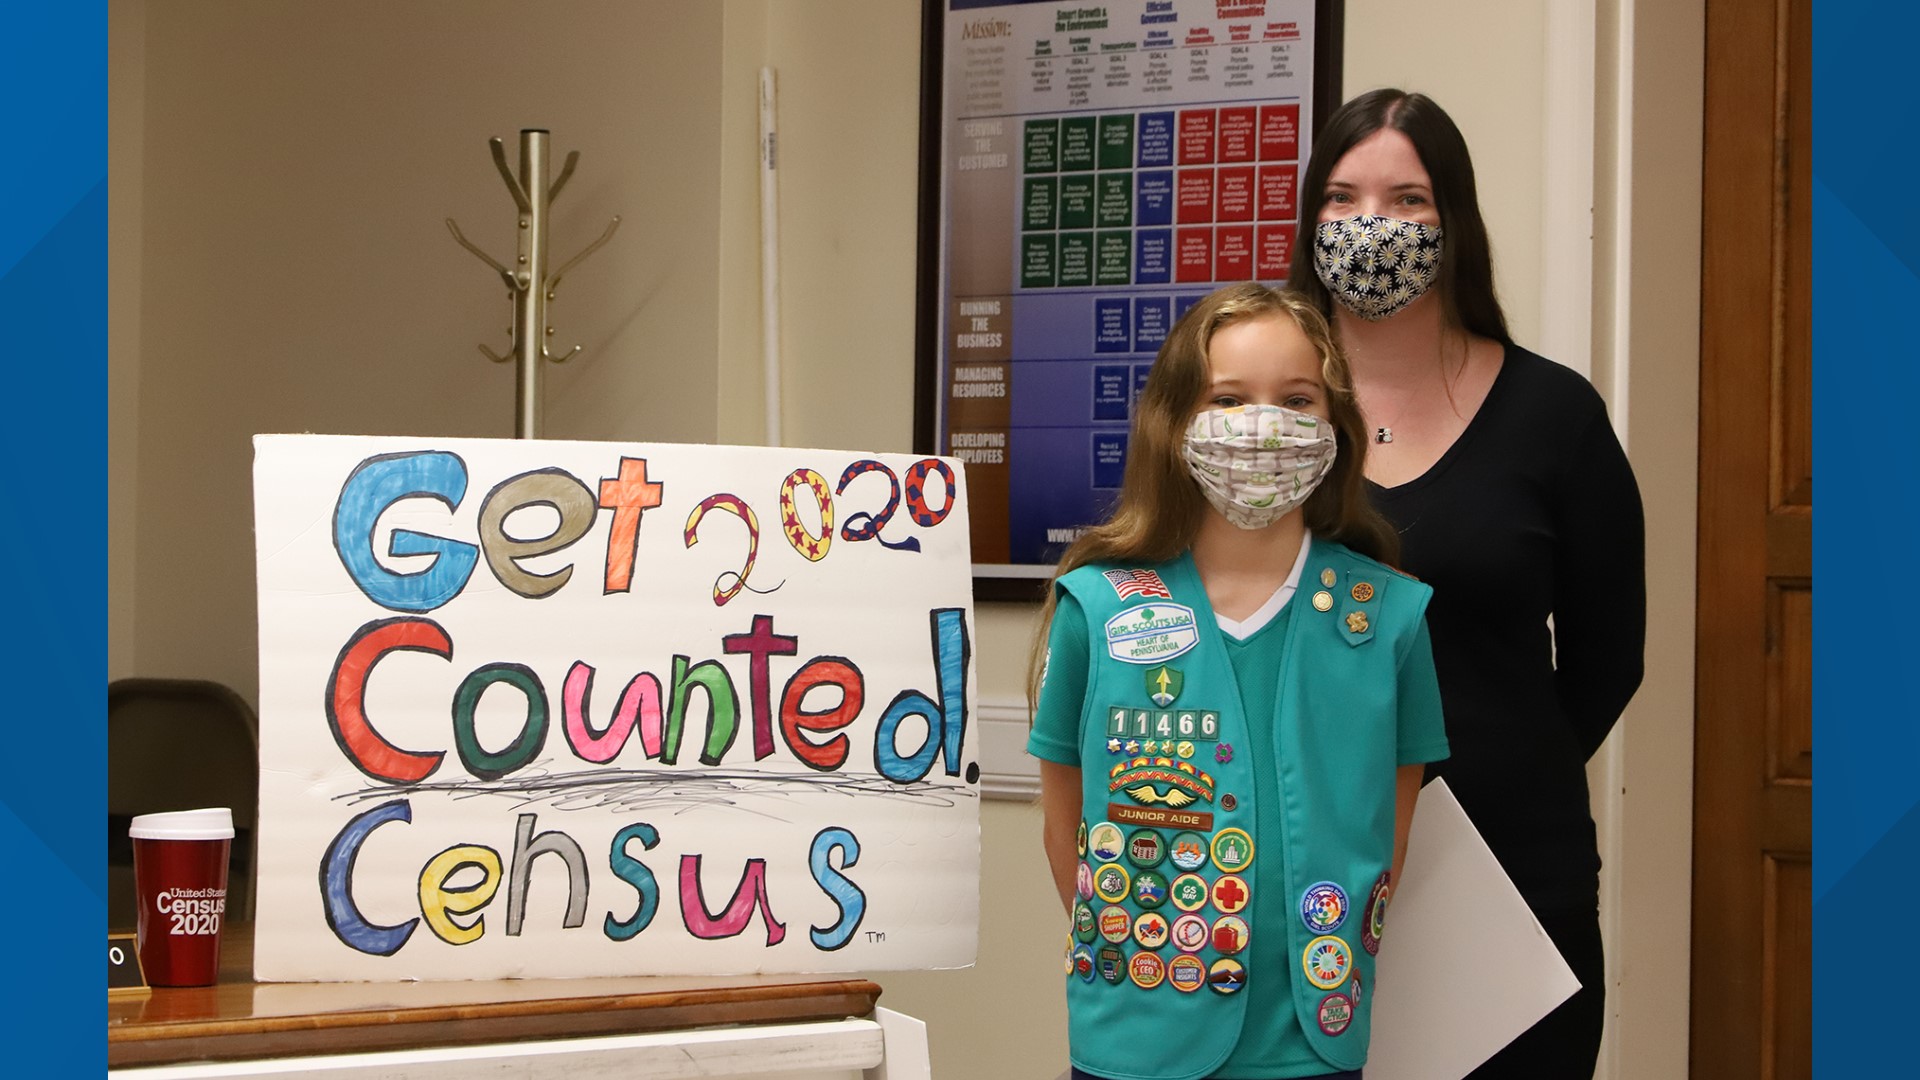 “I wanted to do this so that everyone would understand how important the Census is in our area," 10-year-old Miriam March said.